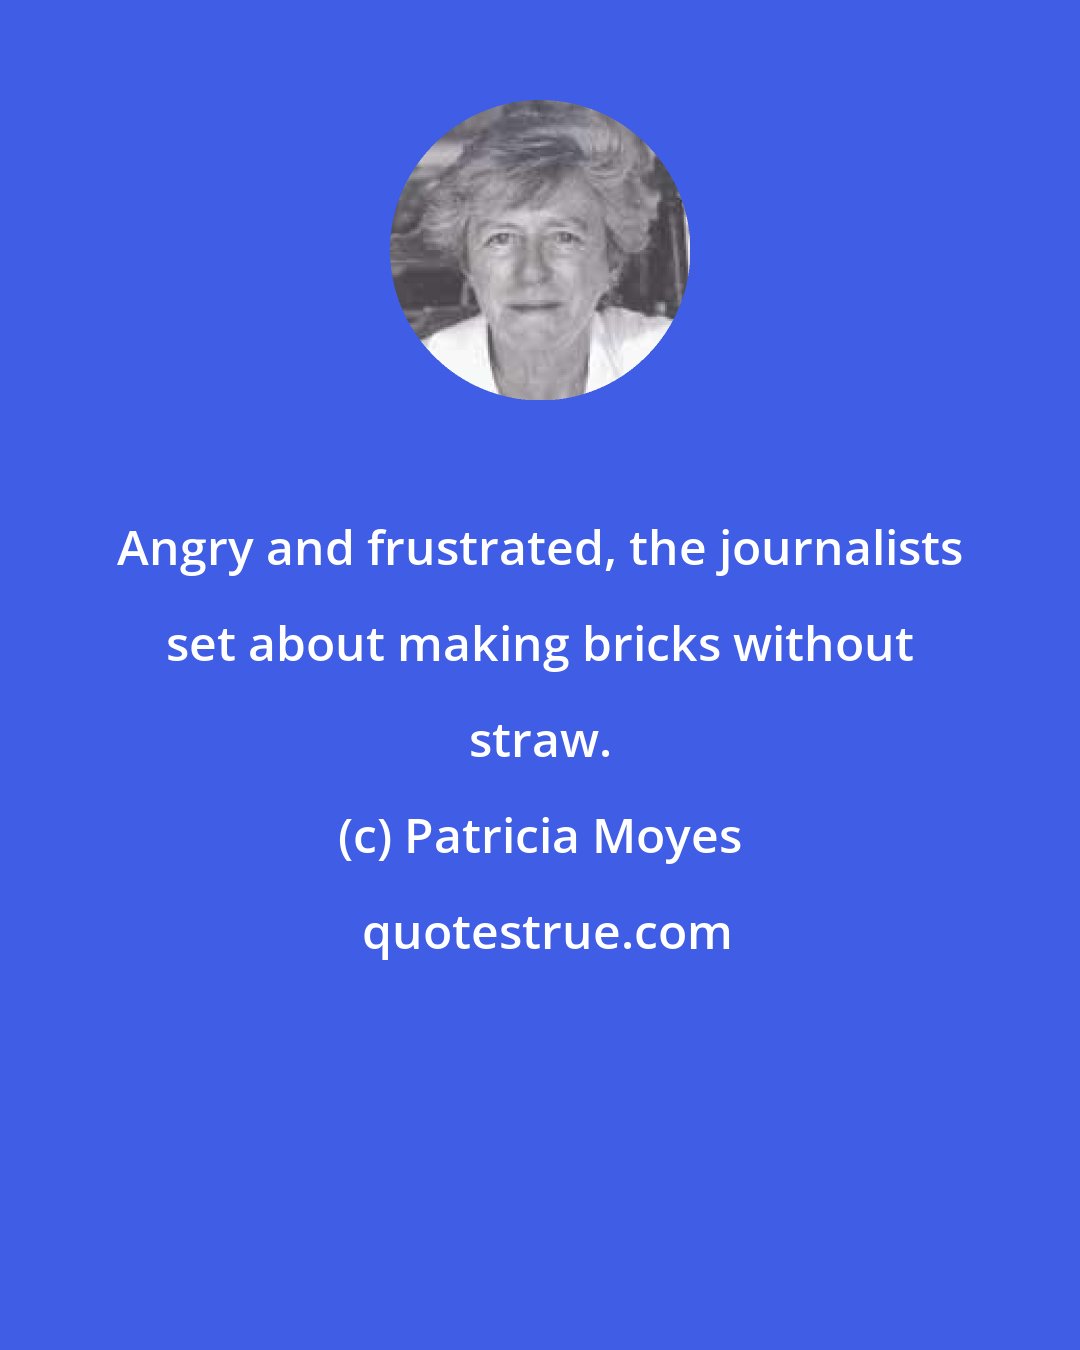 Patricia Moyes: Angry and frustrated, the journalists set about making bricks without straw.